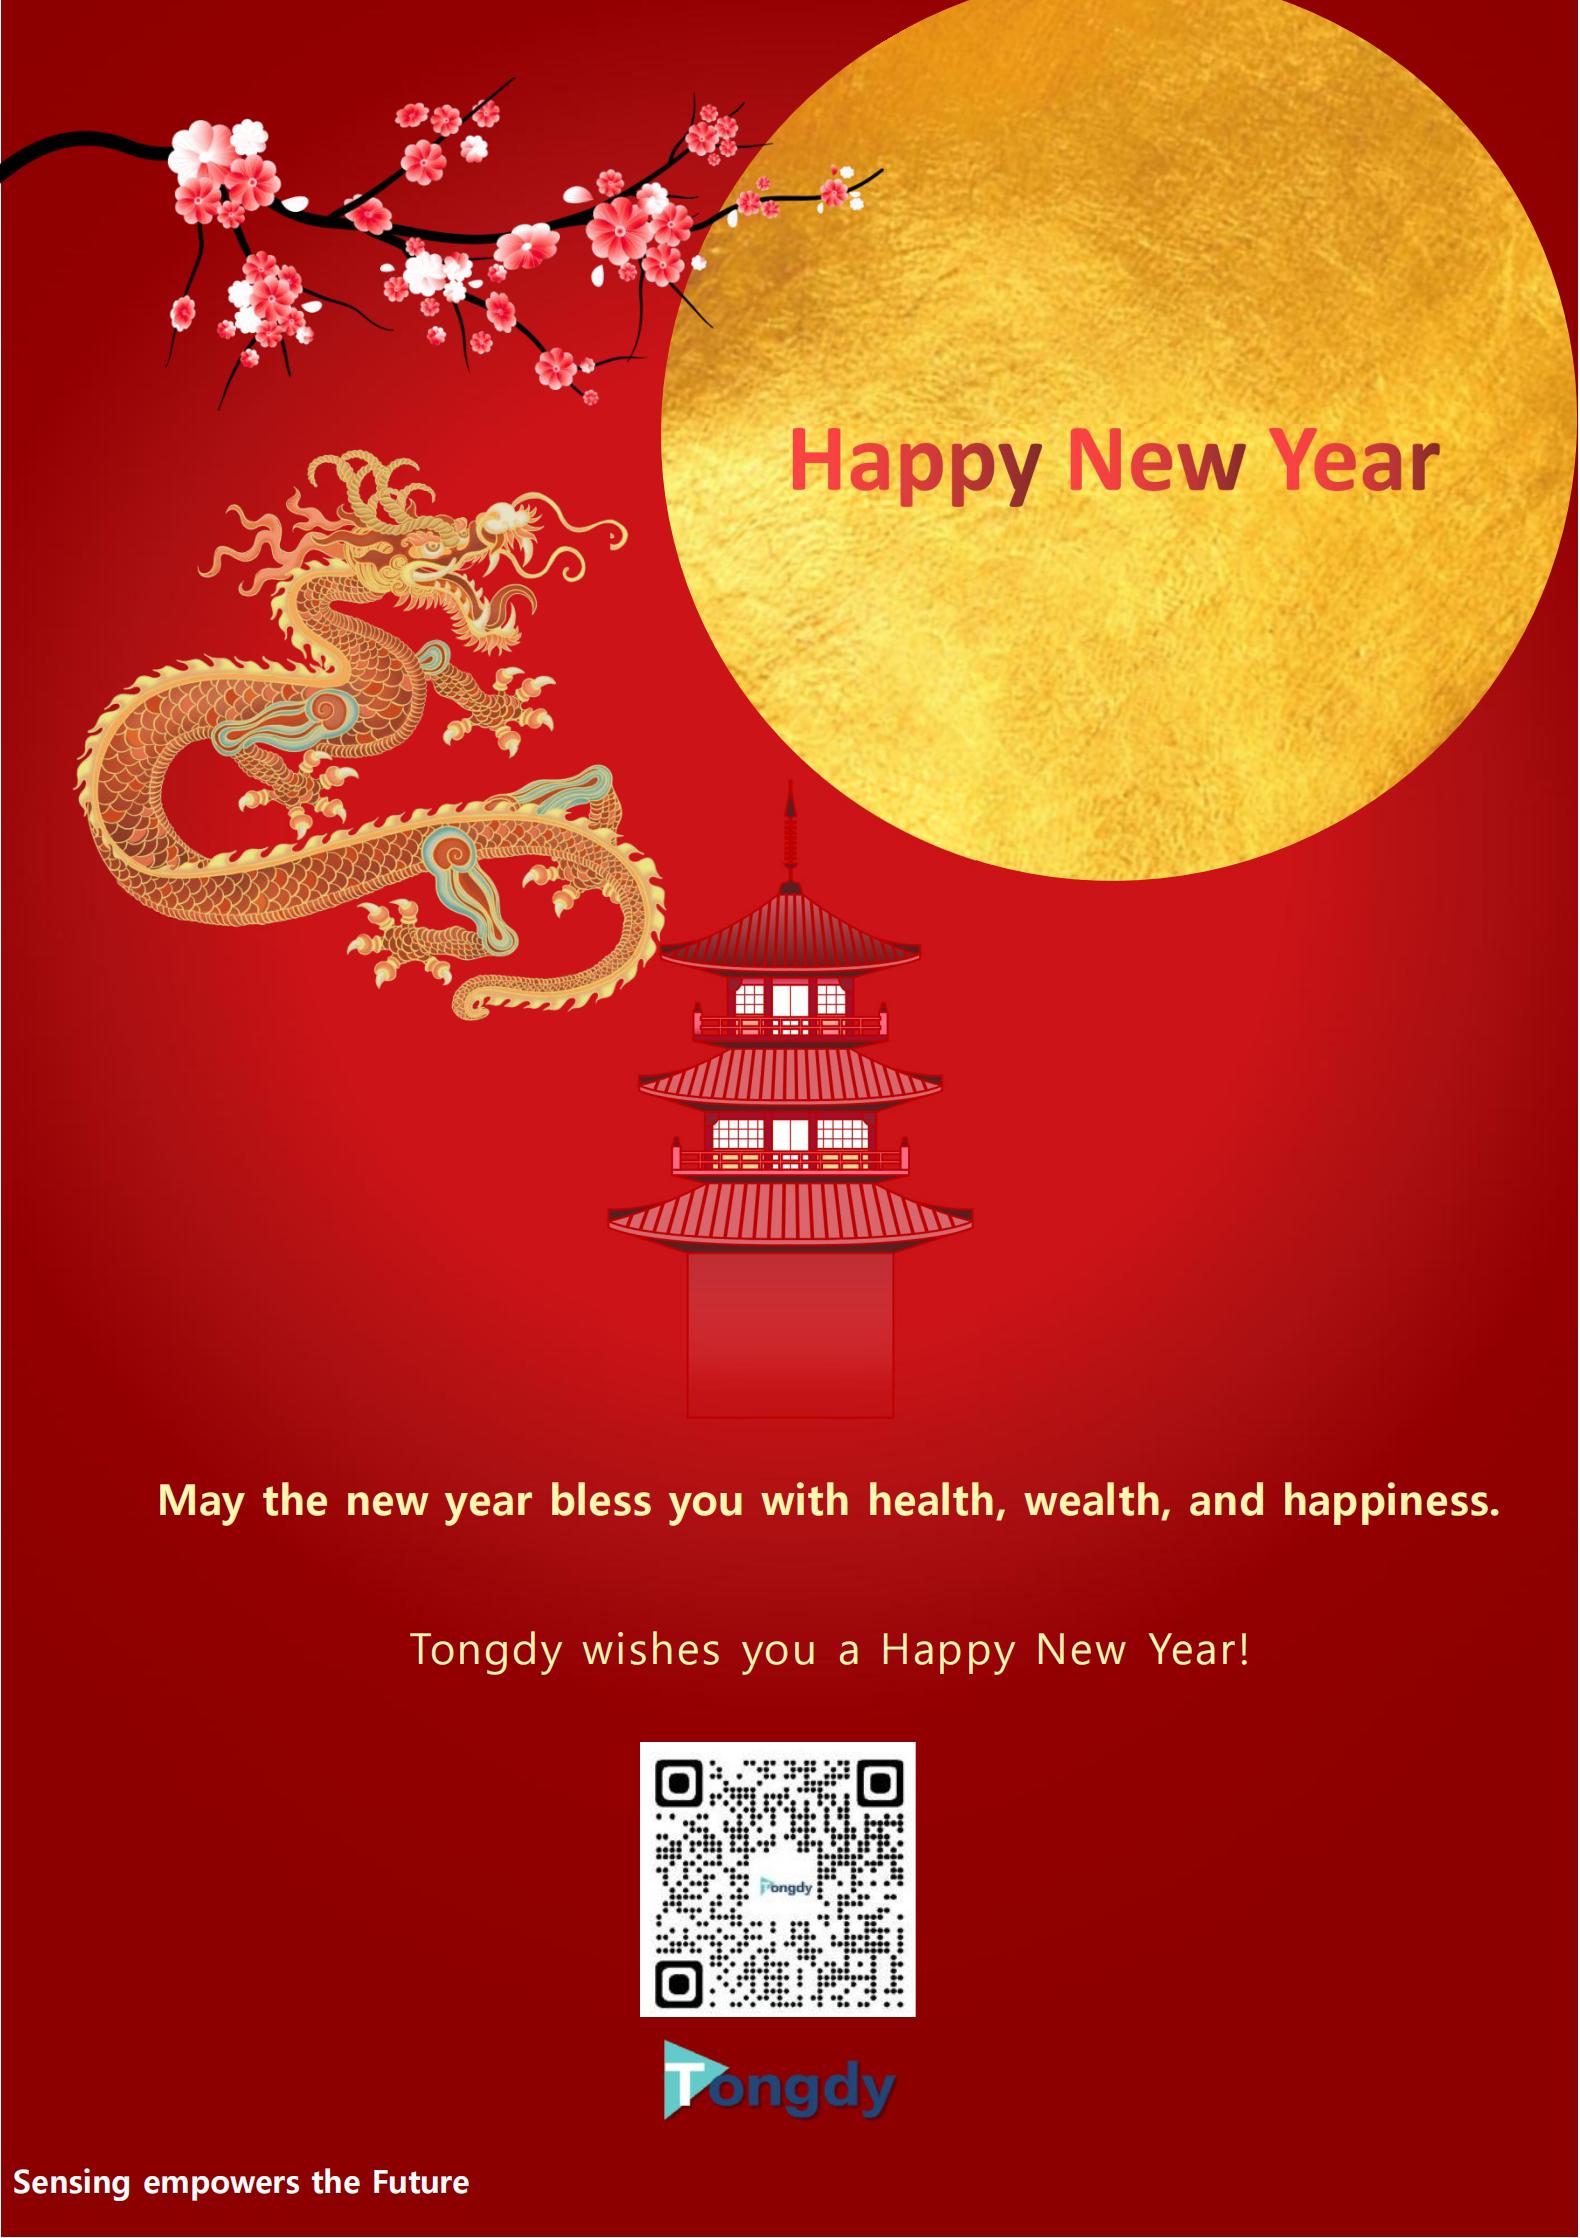 May the new year bless you with health, wealth, and happiness-2024